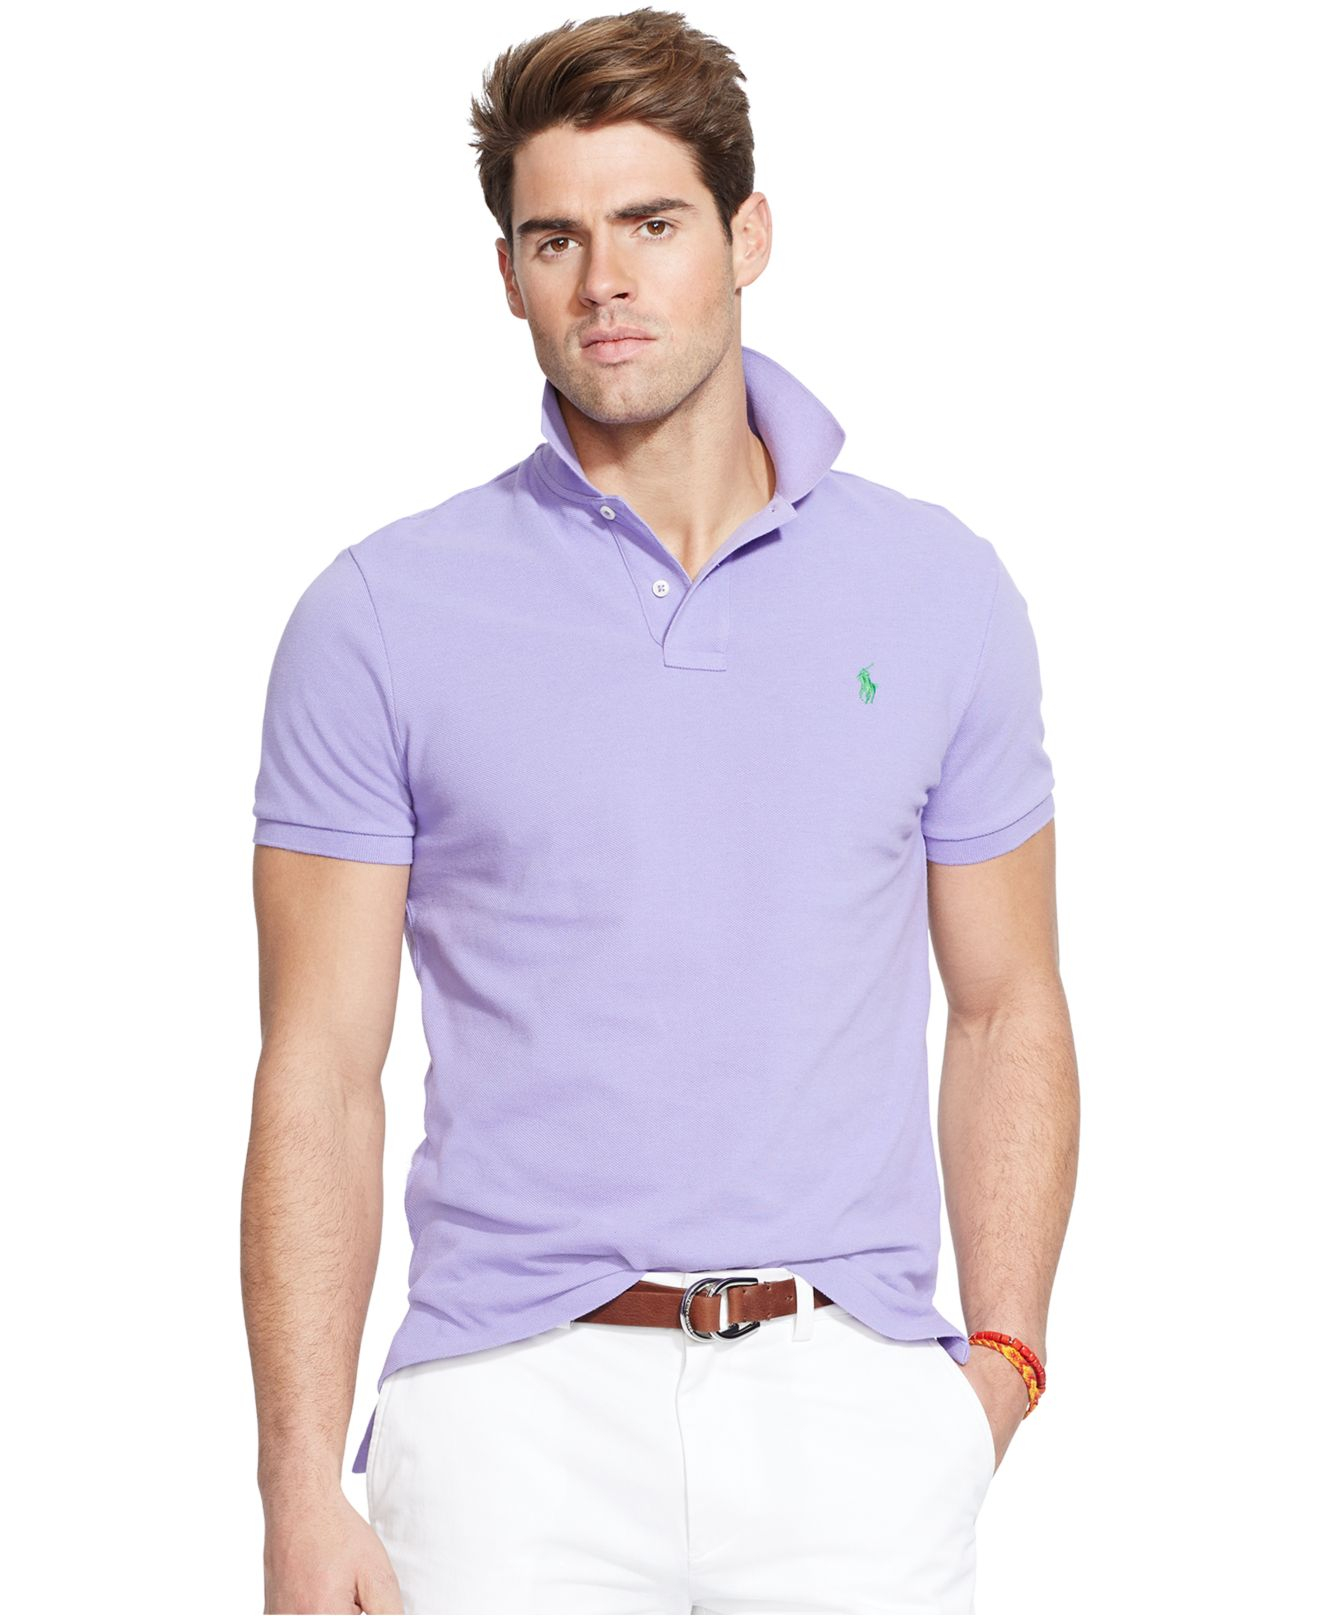 Lyst - Polo Ralph Lauren Classic-fit Mesh Polo in Purple for Men